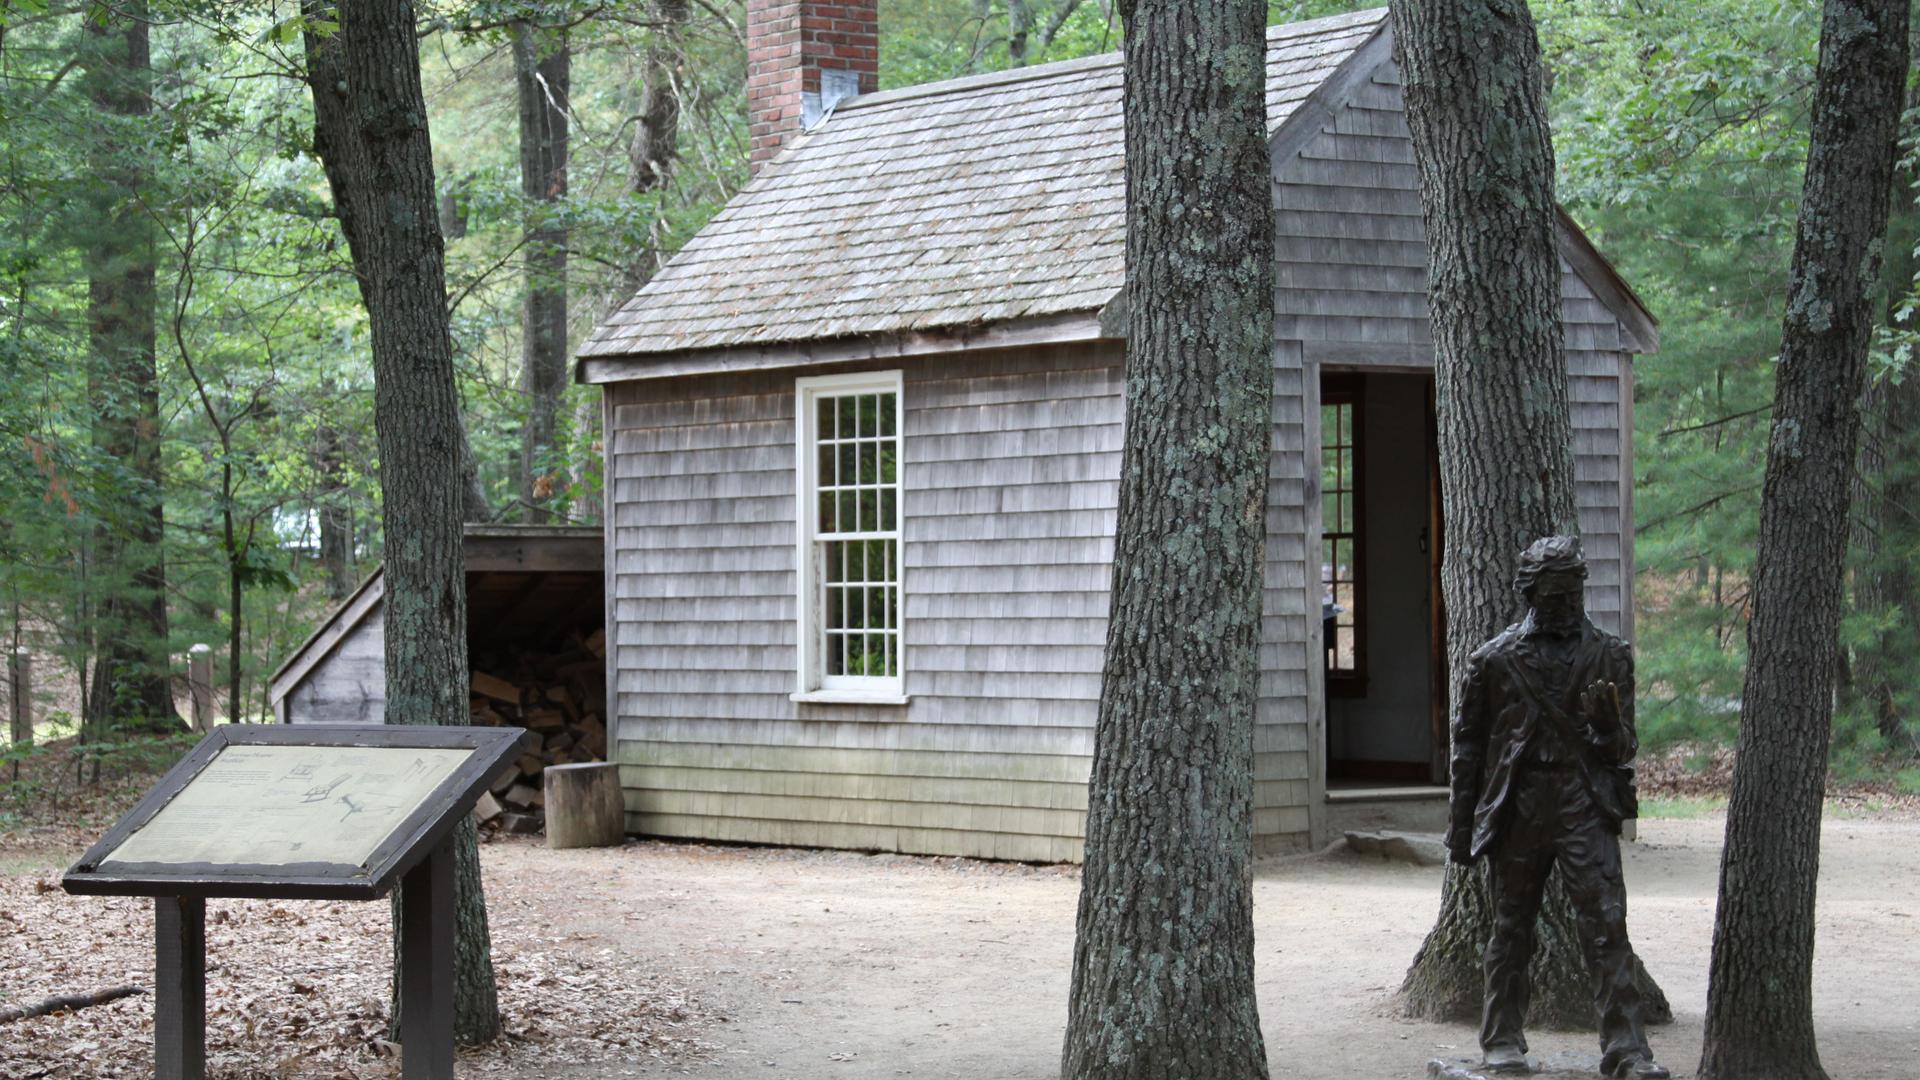 Replica of Henry David Thoreau's cabin at Walden Pond in Concord, Massachusetts.